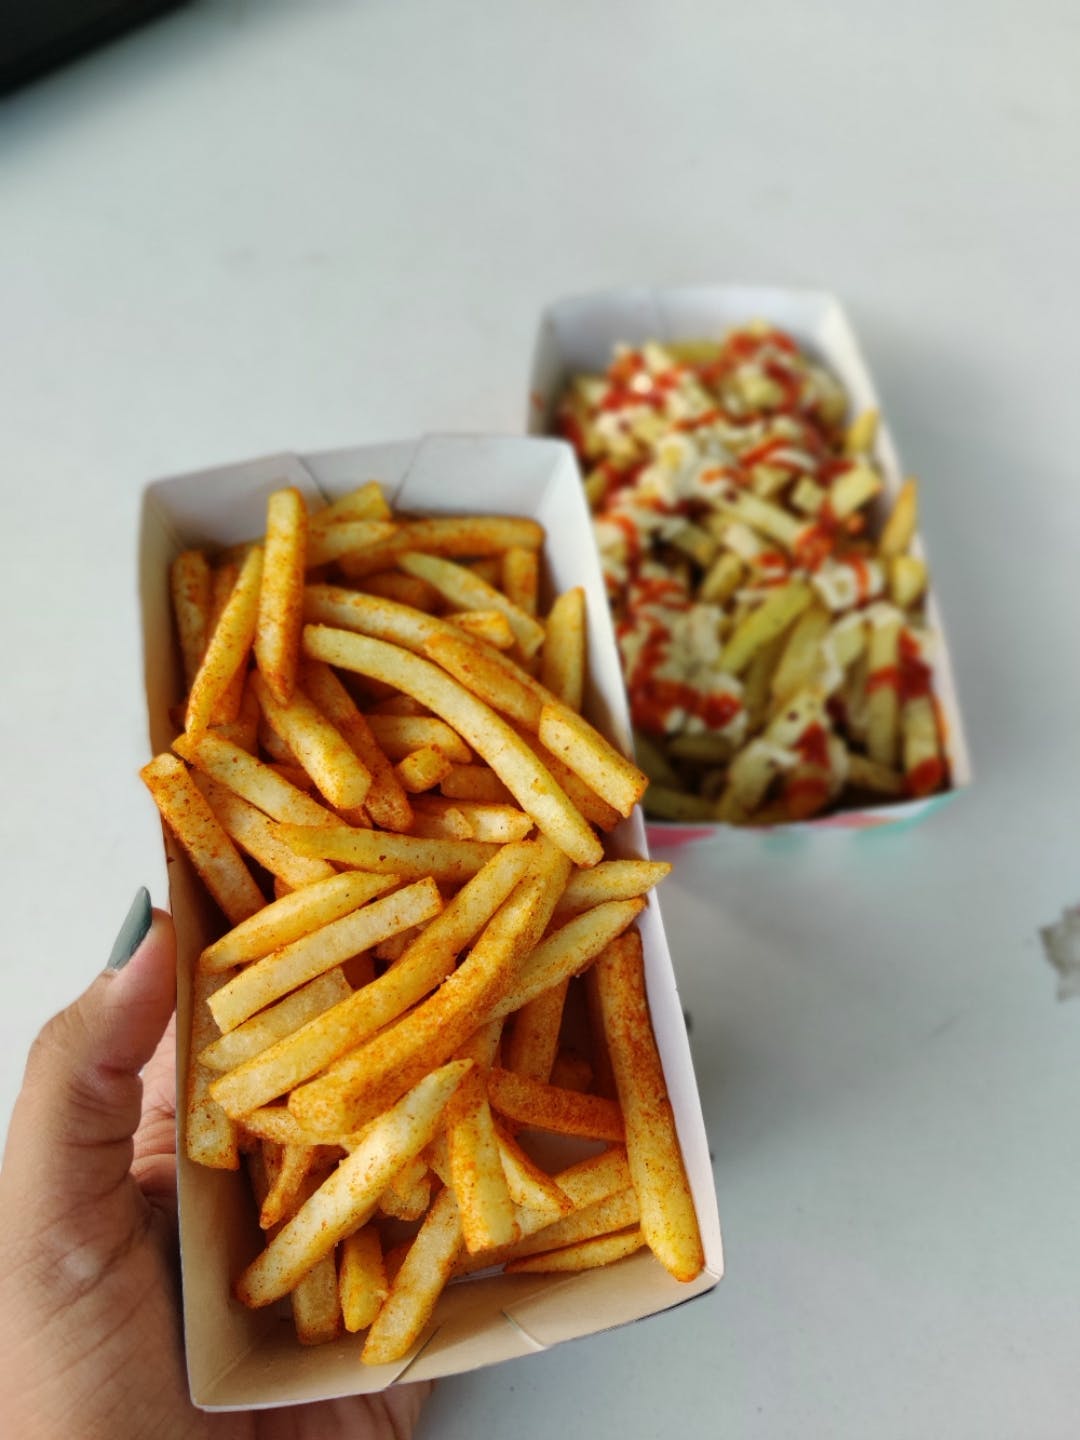 Dish,French fries,Junk food,Fast food,Food,Fried food,Cuisine,Side dish,Kids' meal,Ingredient